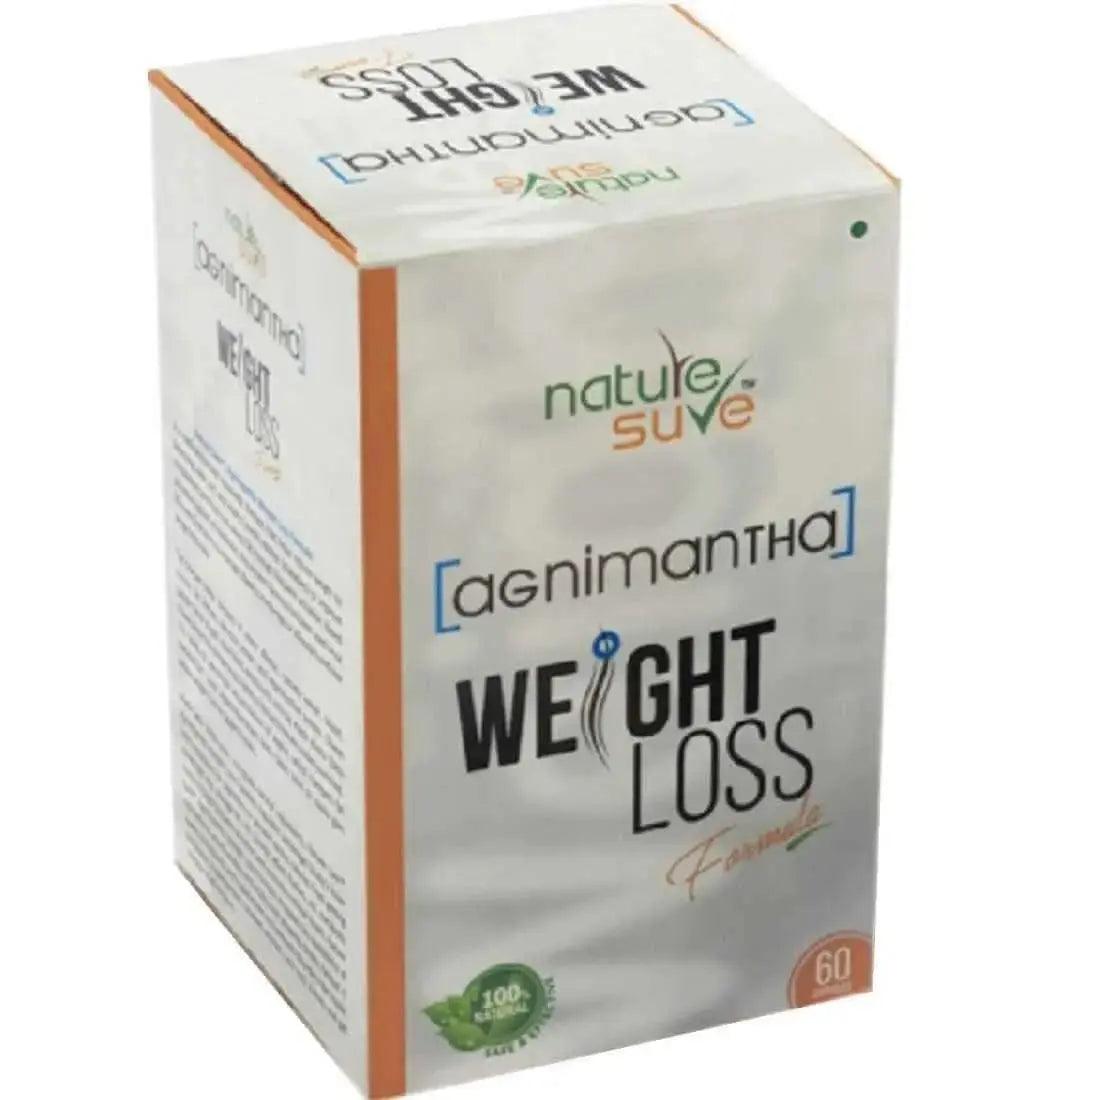 Nature Sure Agnimantha Weight Loss Formula For Men and Women - 60 Capsules 8903540009101